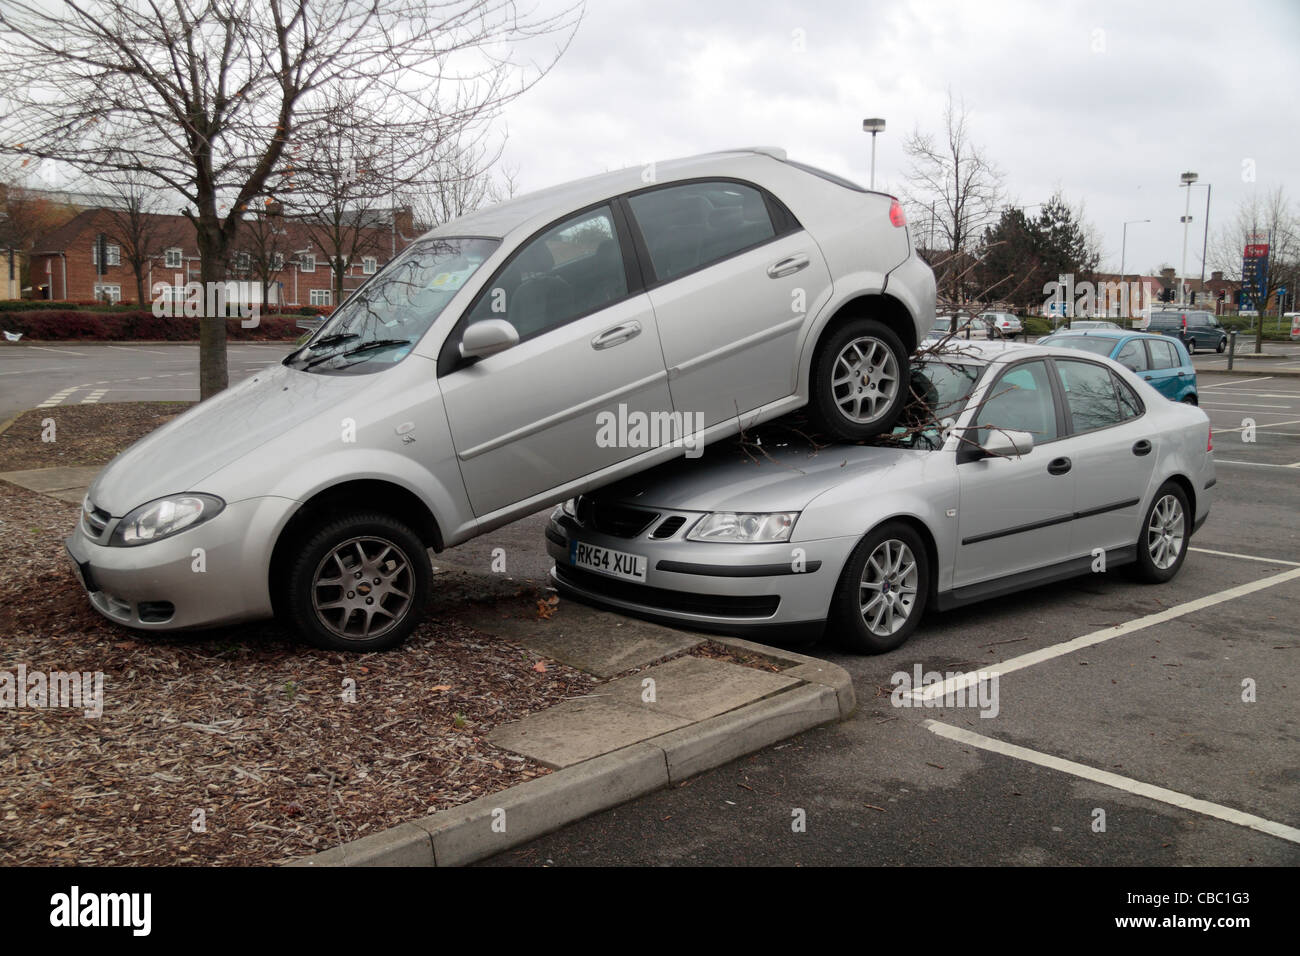 A car park incident where one car was accidentally reversed up a kerb, into a tree and up onto the bonnet of another car. Stock Photo